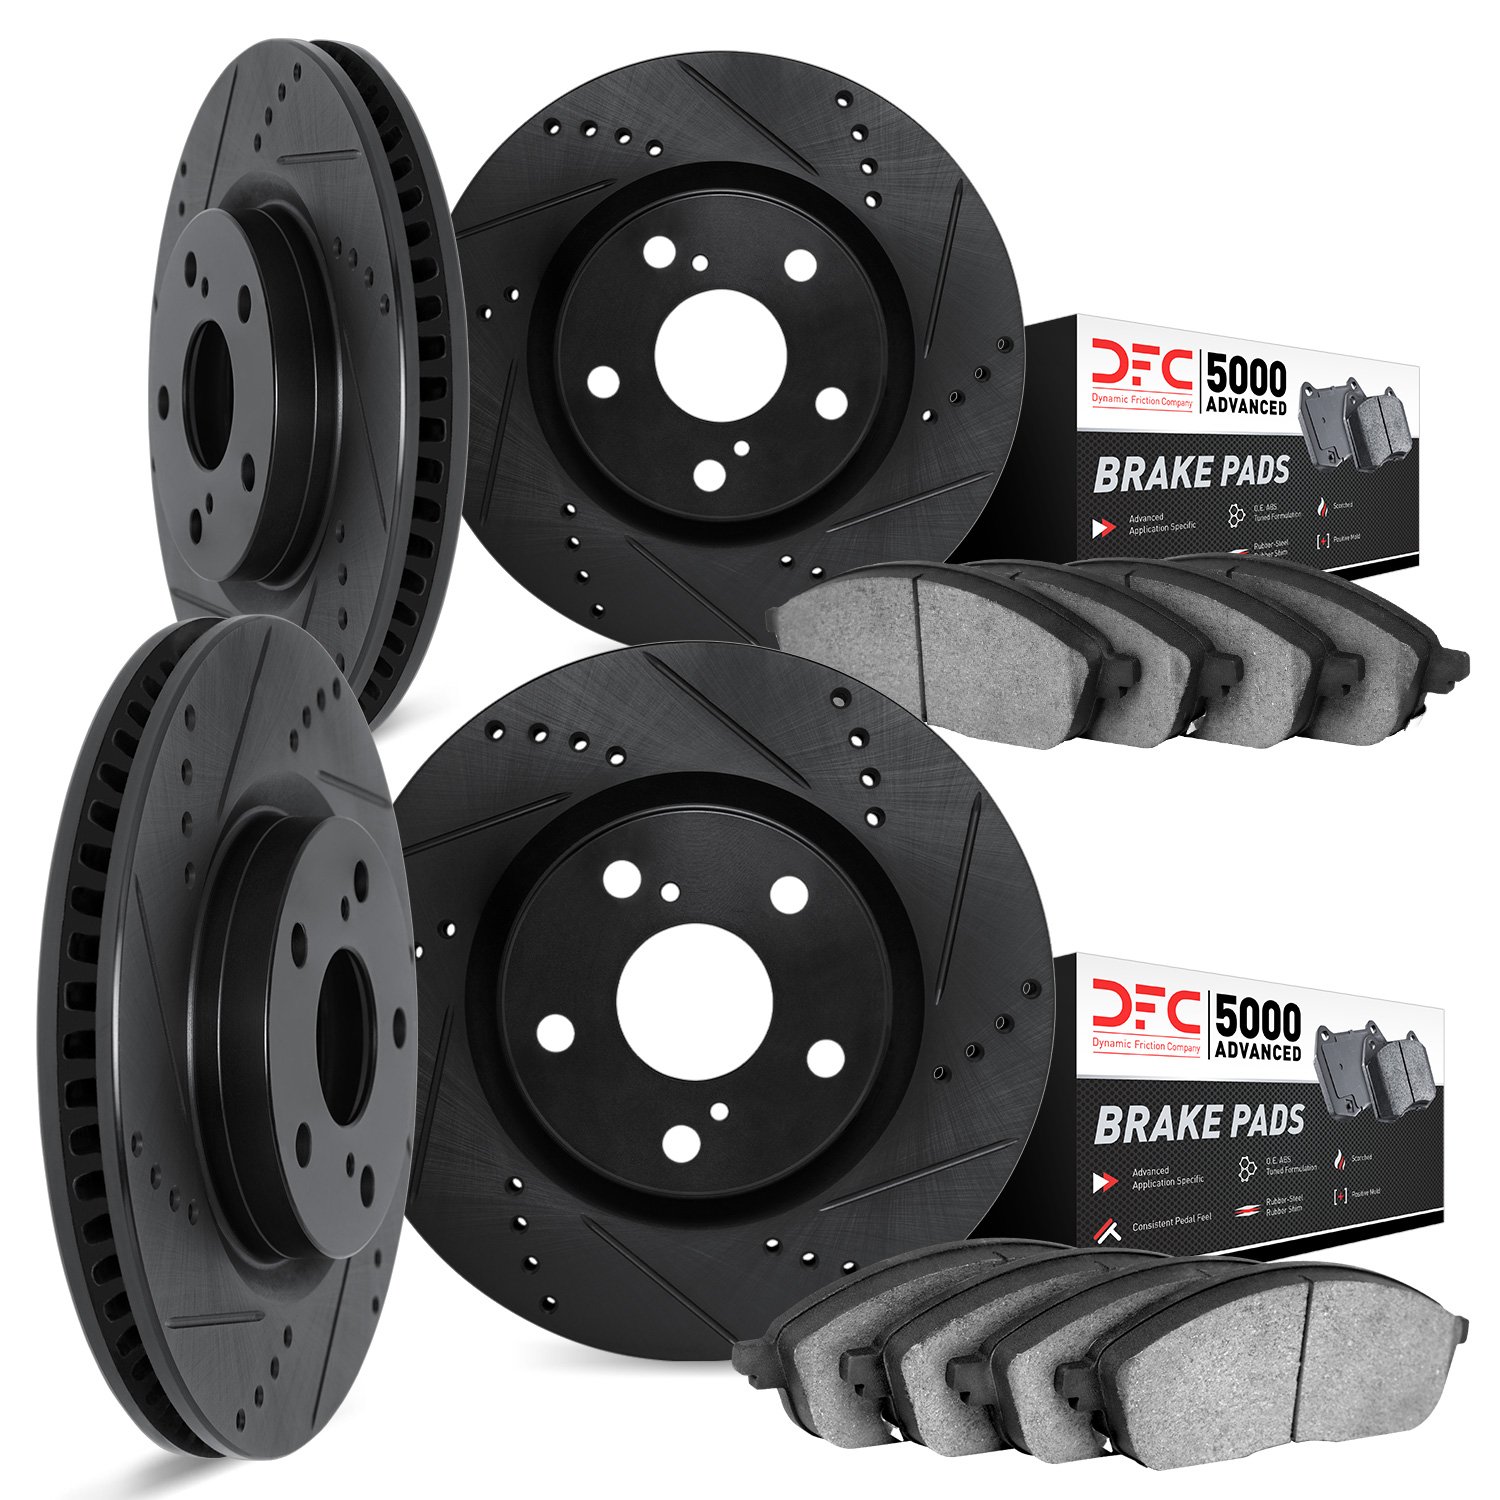 8504-31042 Drilled/Slotted Brake Rotors w/5000 Advanced Brake Pads Kit [Black], 2012-2019 BMW, Position: Front and Rear